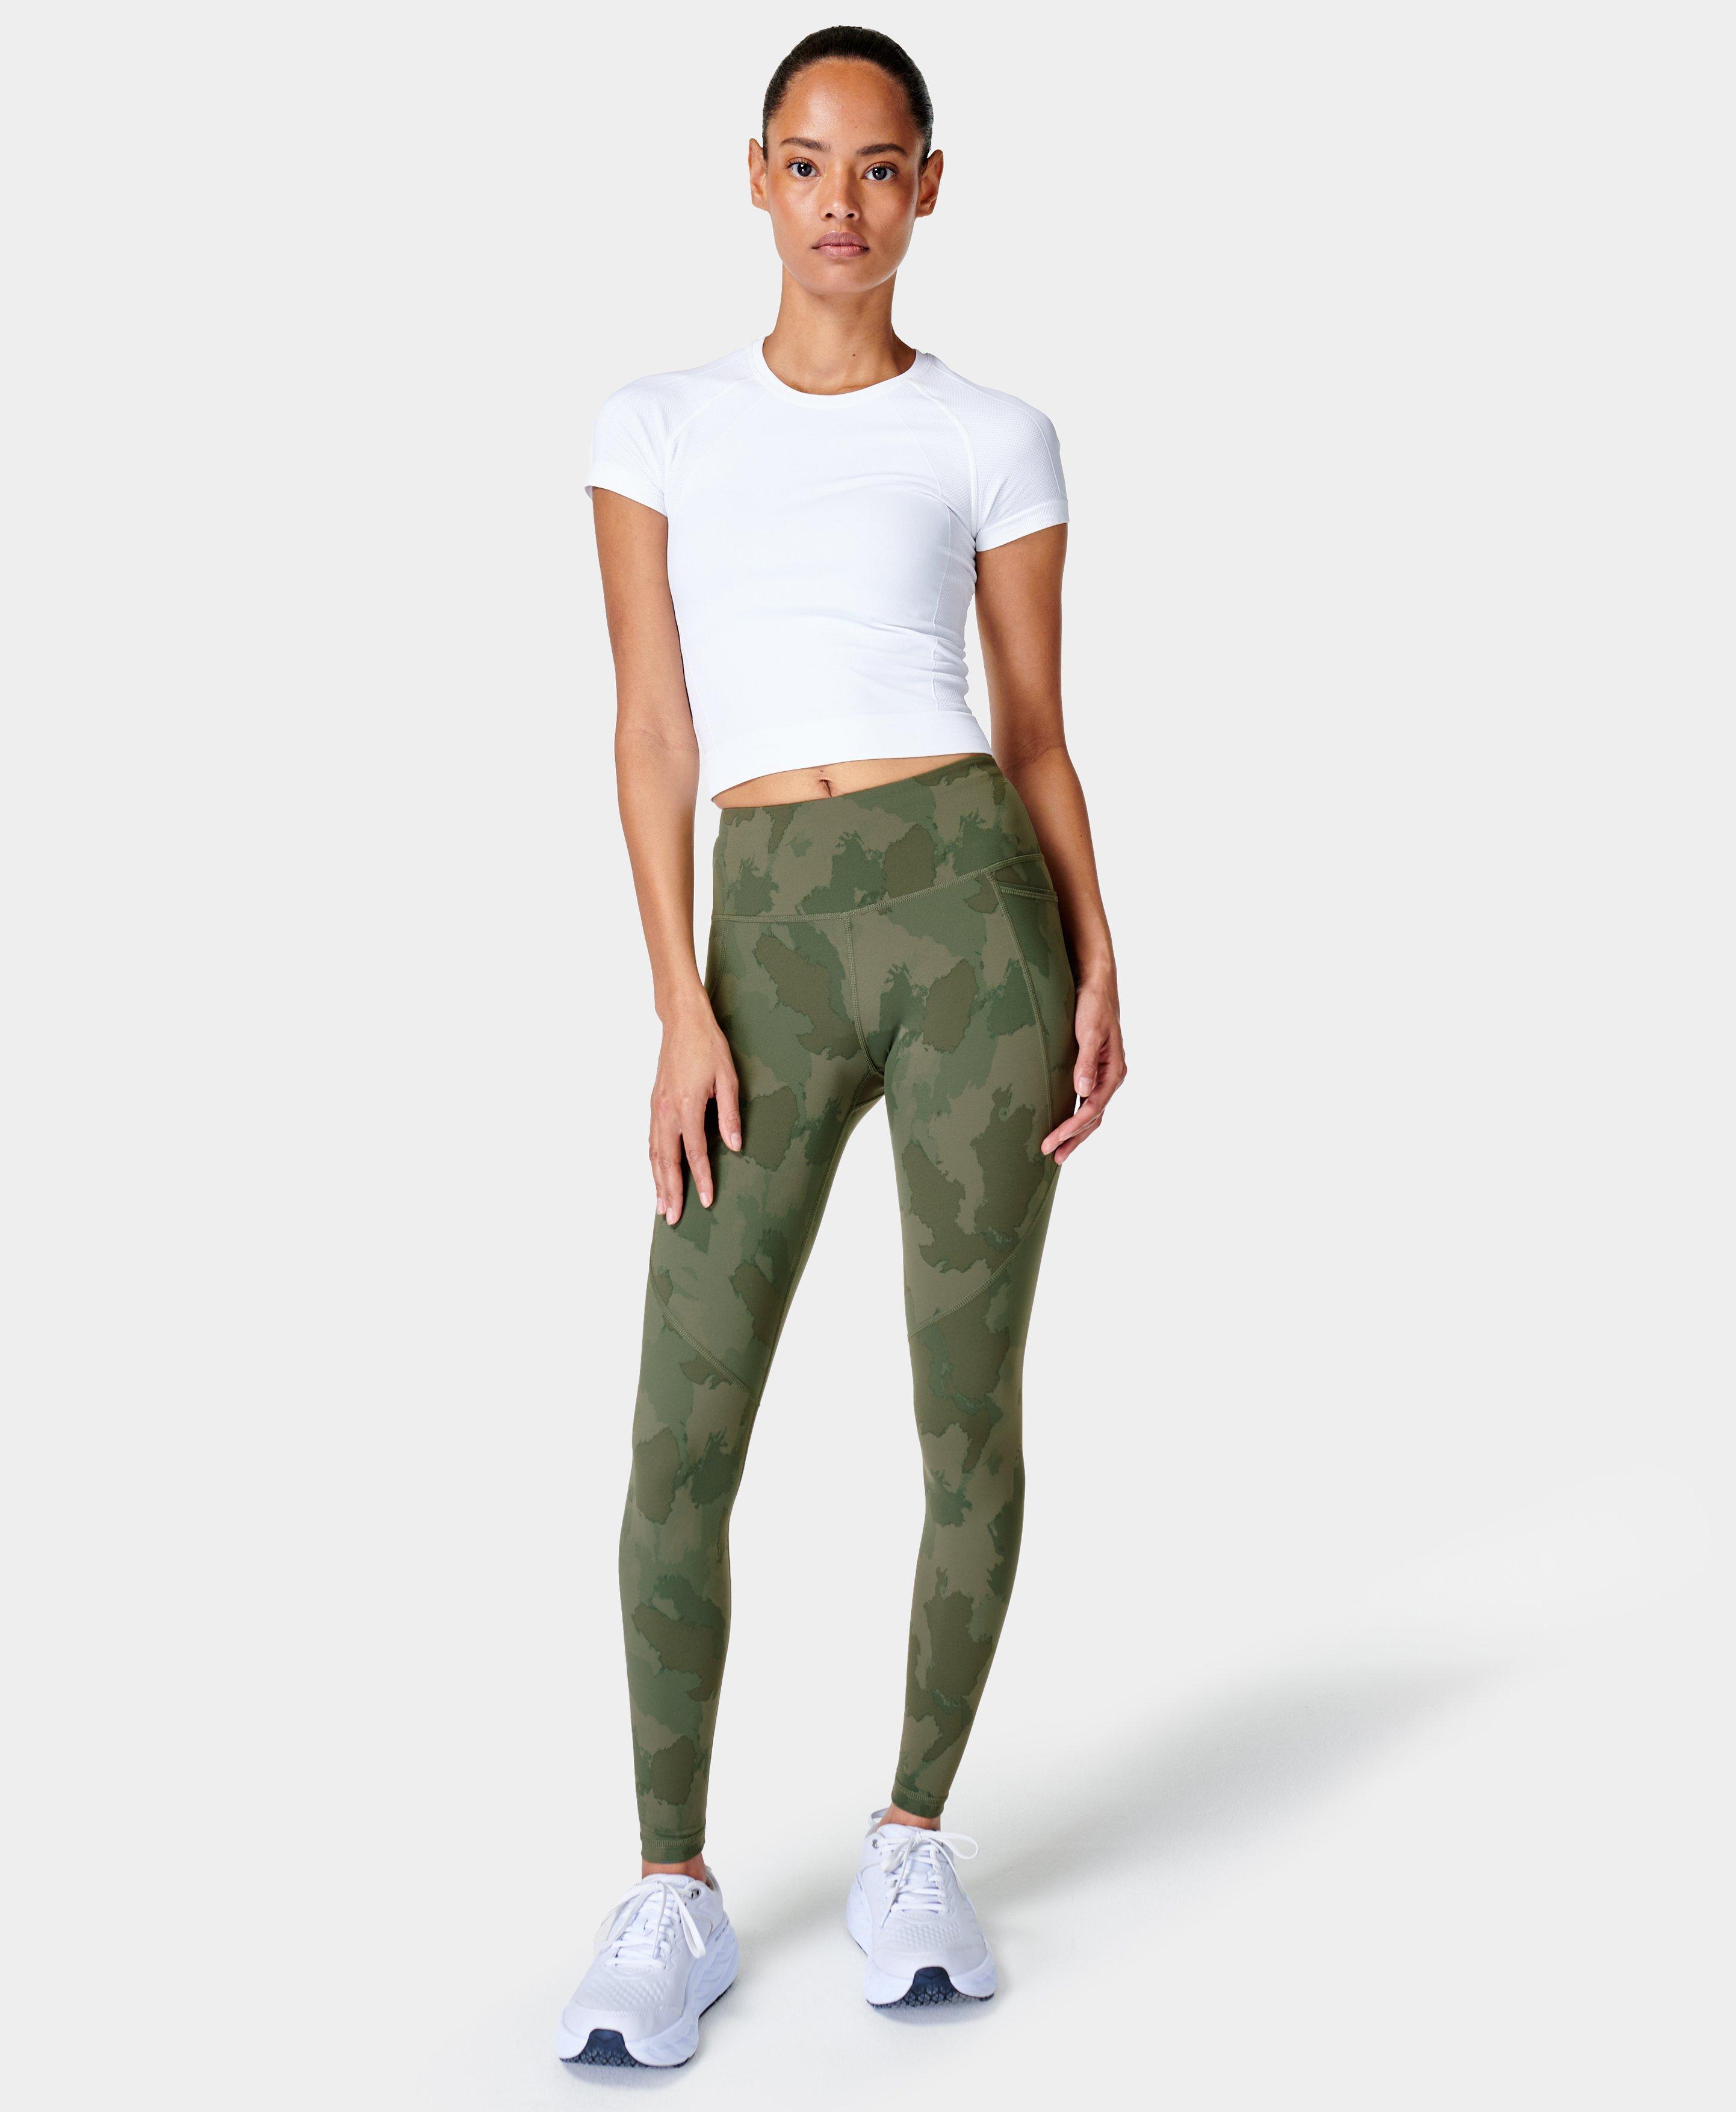 Hunt You Down Camo Leggings – Initial Outfitters